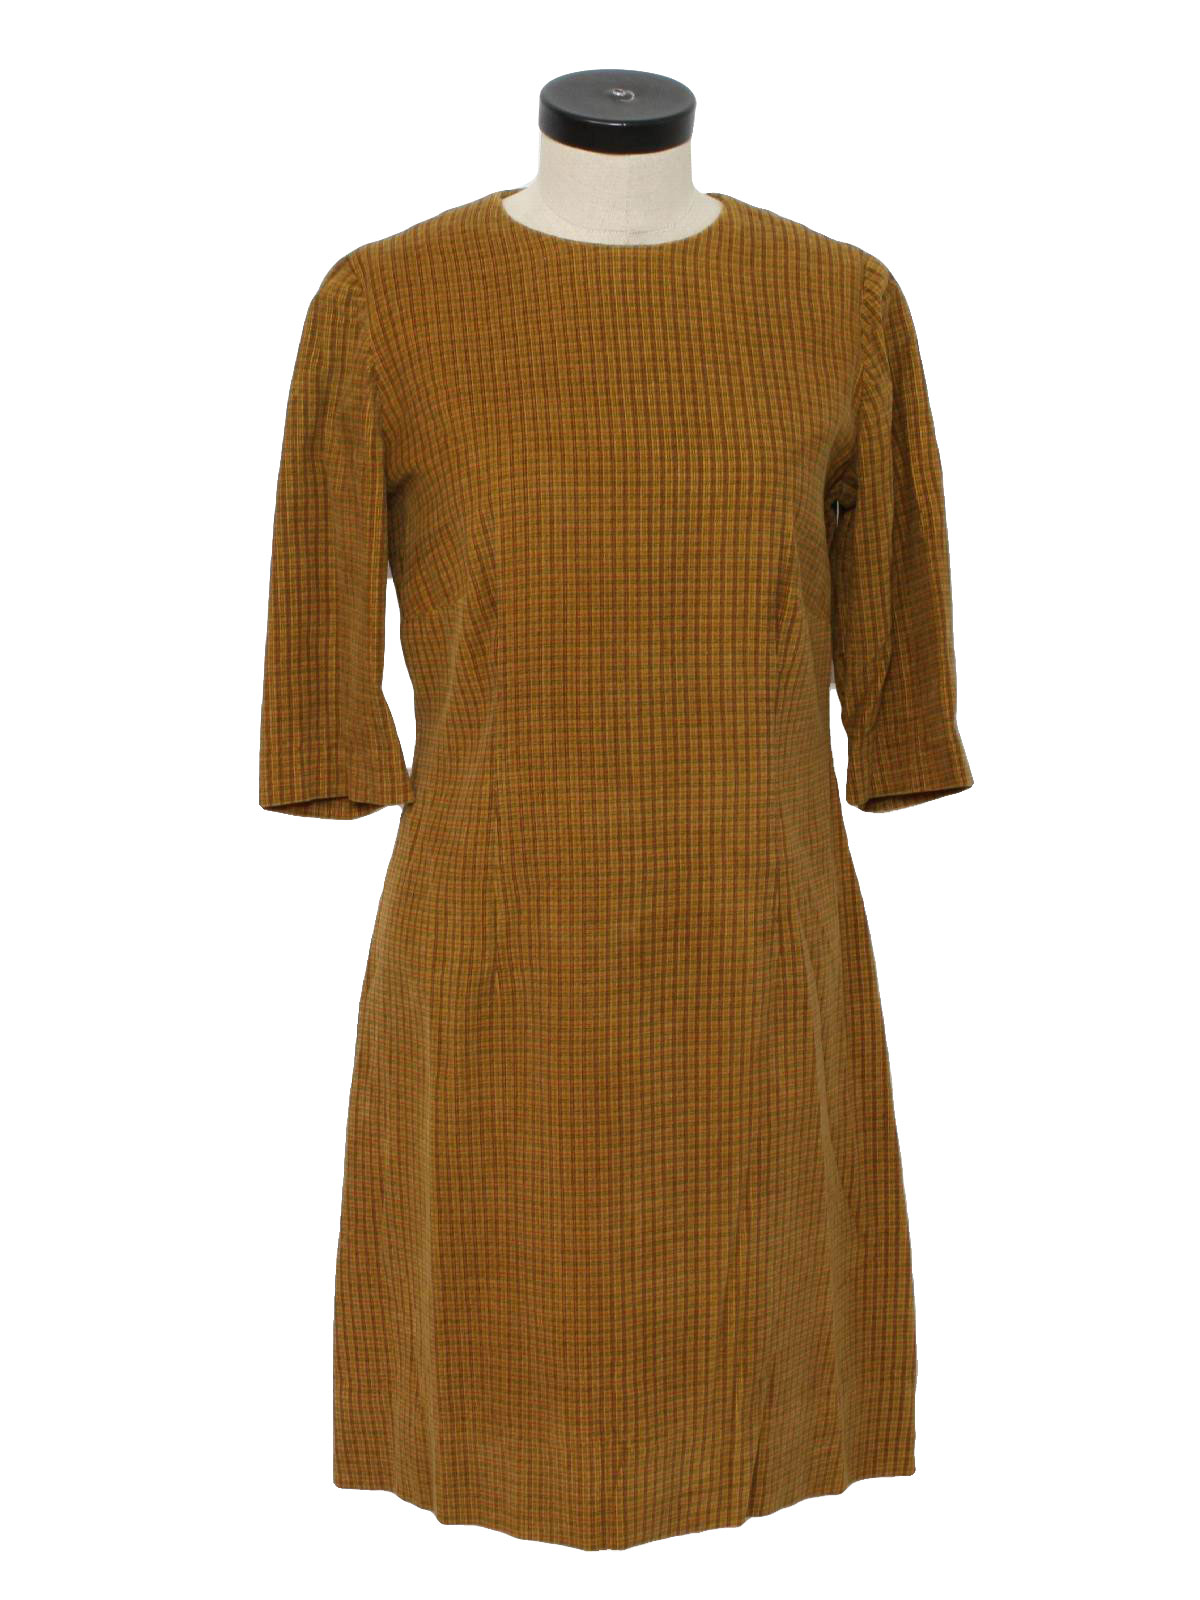 Vintage 70s Dress: 70s -Home Sewn- Womens gold, corduroy, mid-length ...